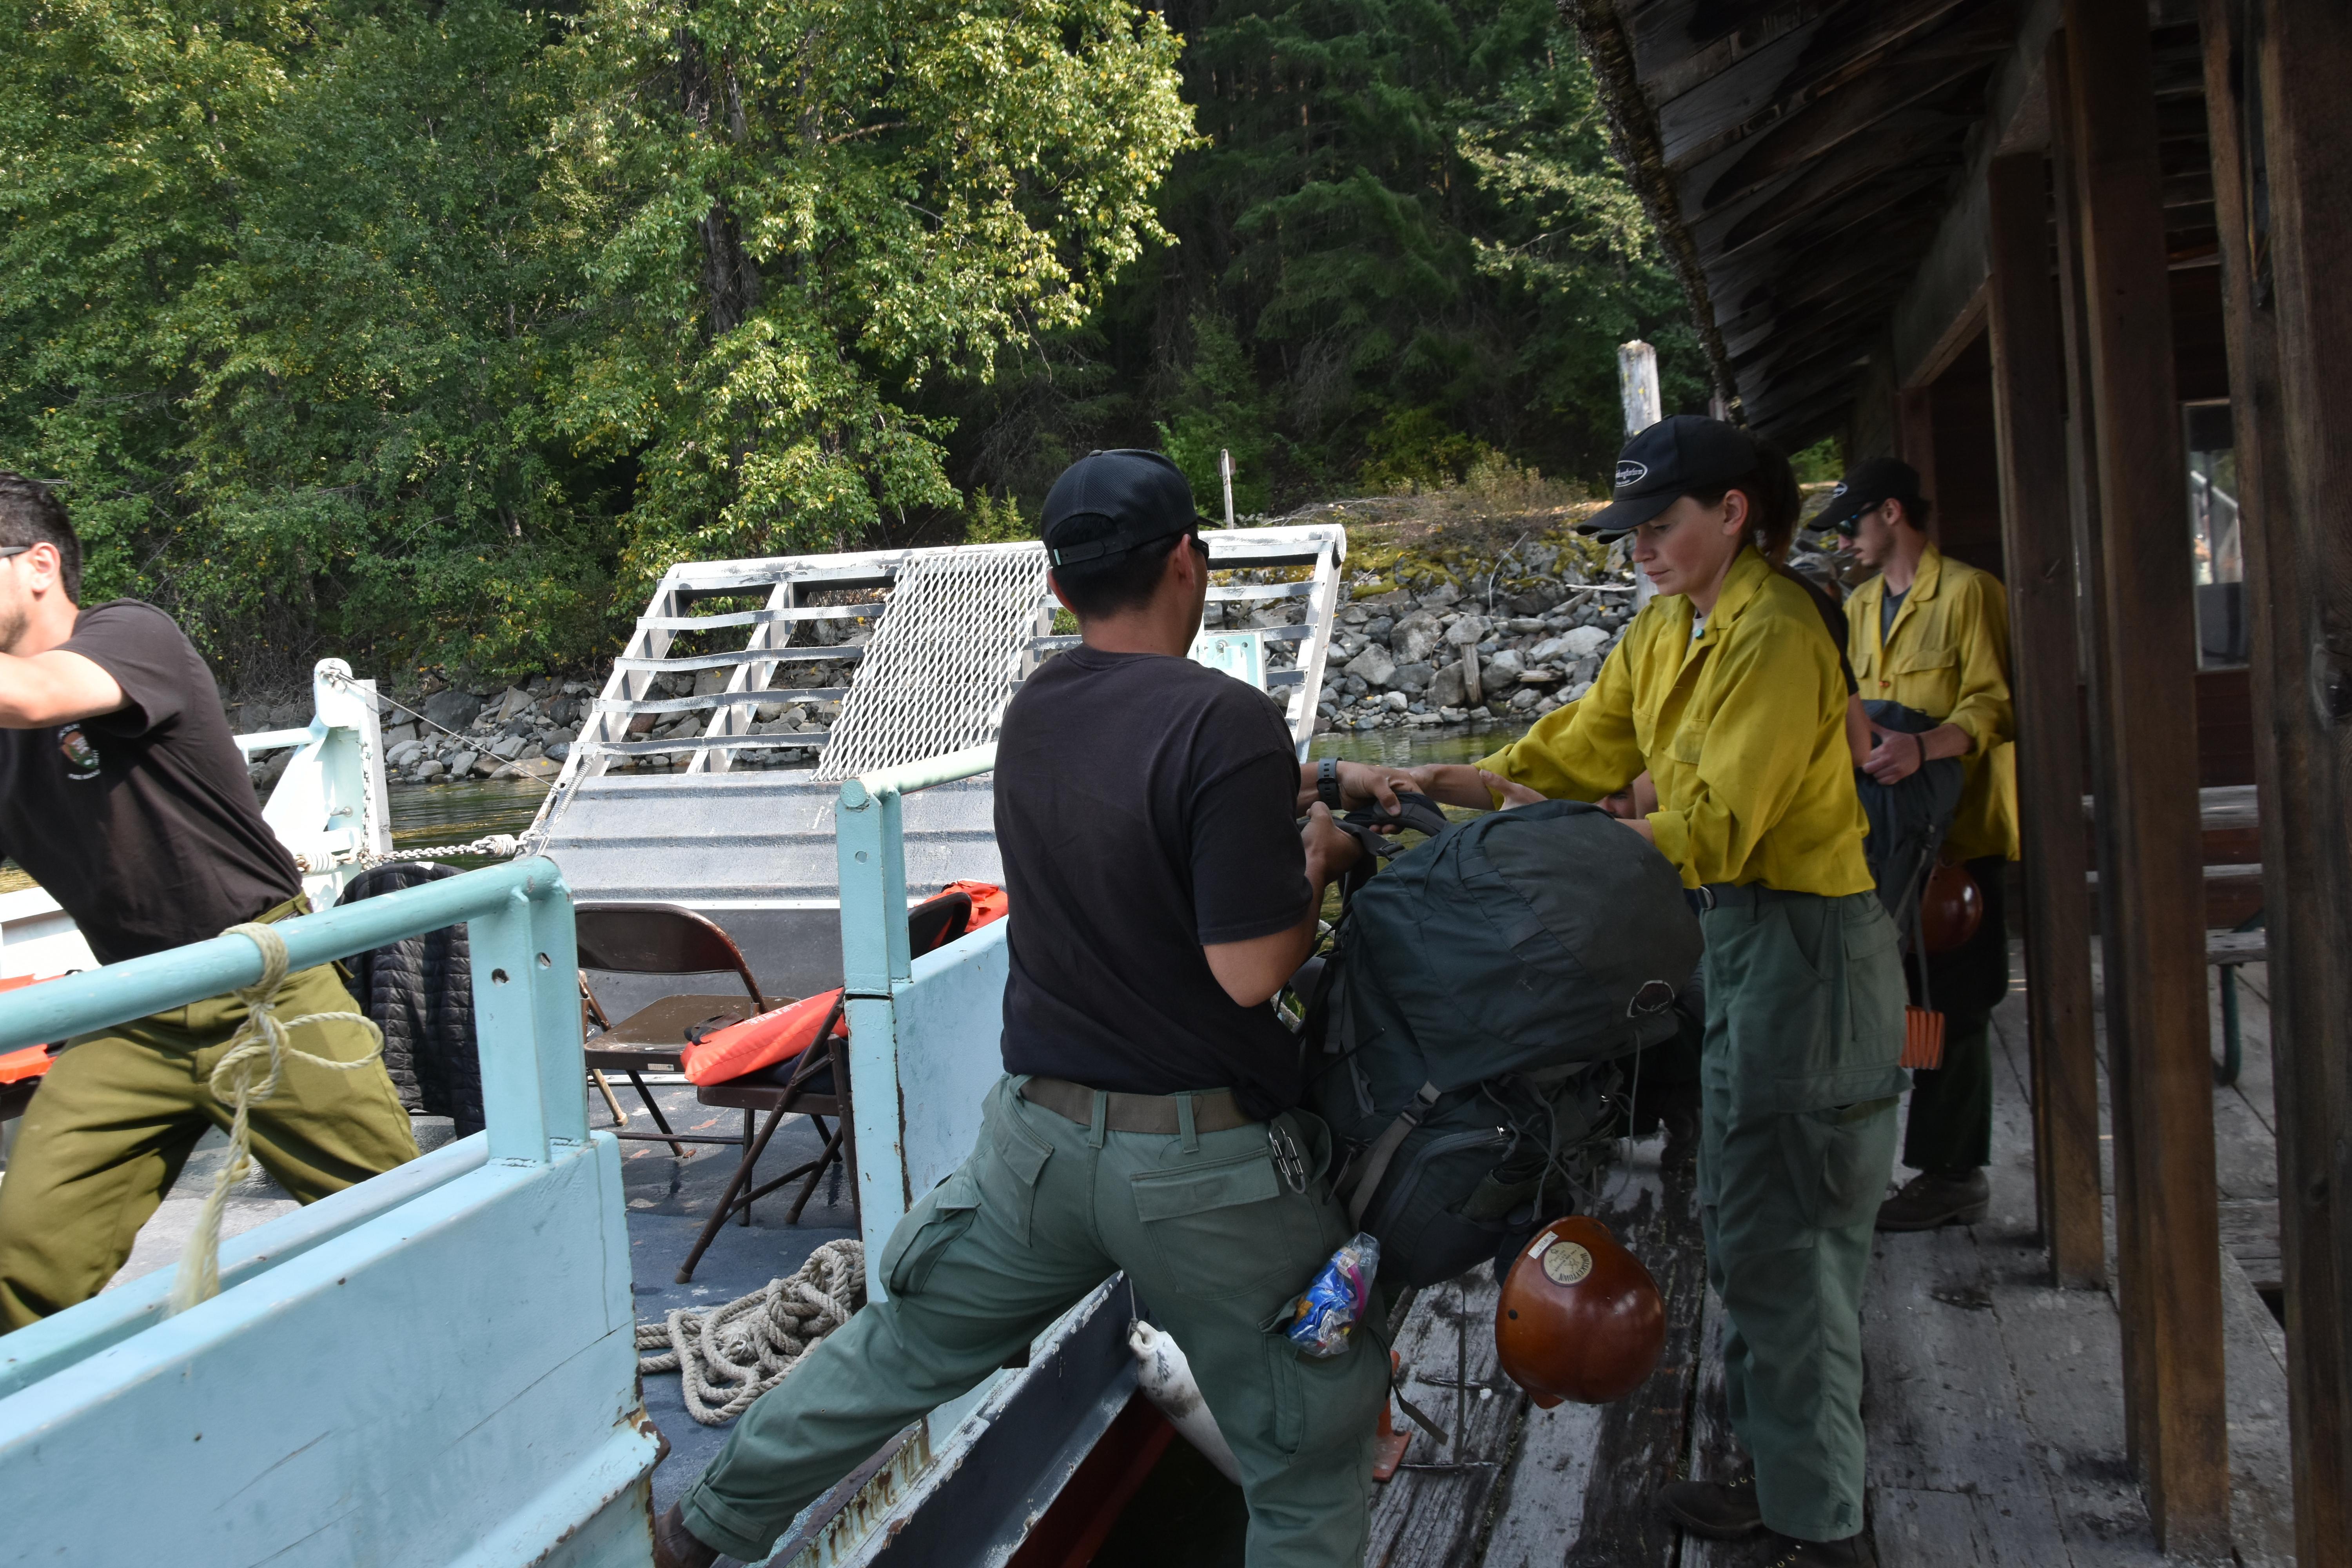 Whiskeytown and Hawaii Volcanoes Wildland Fire Modules arrive at Hozomeen to initiate structure protection assessment of on-site buildings.